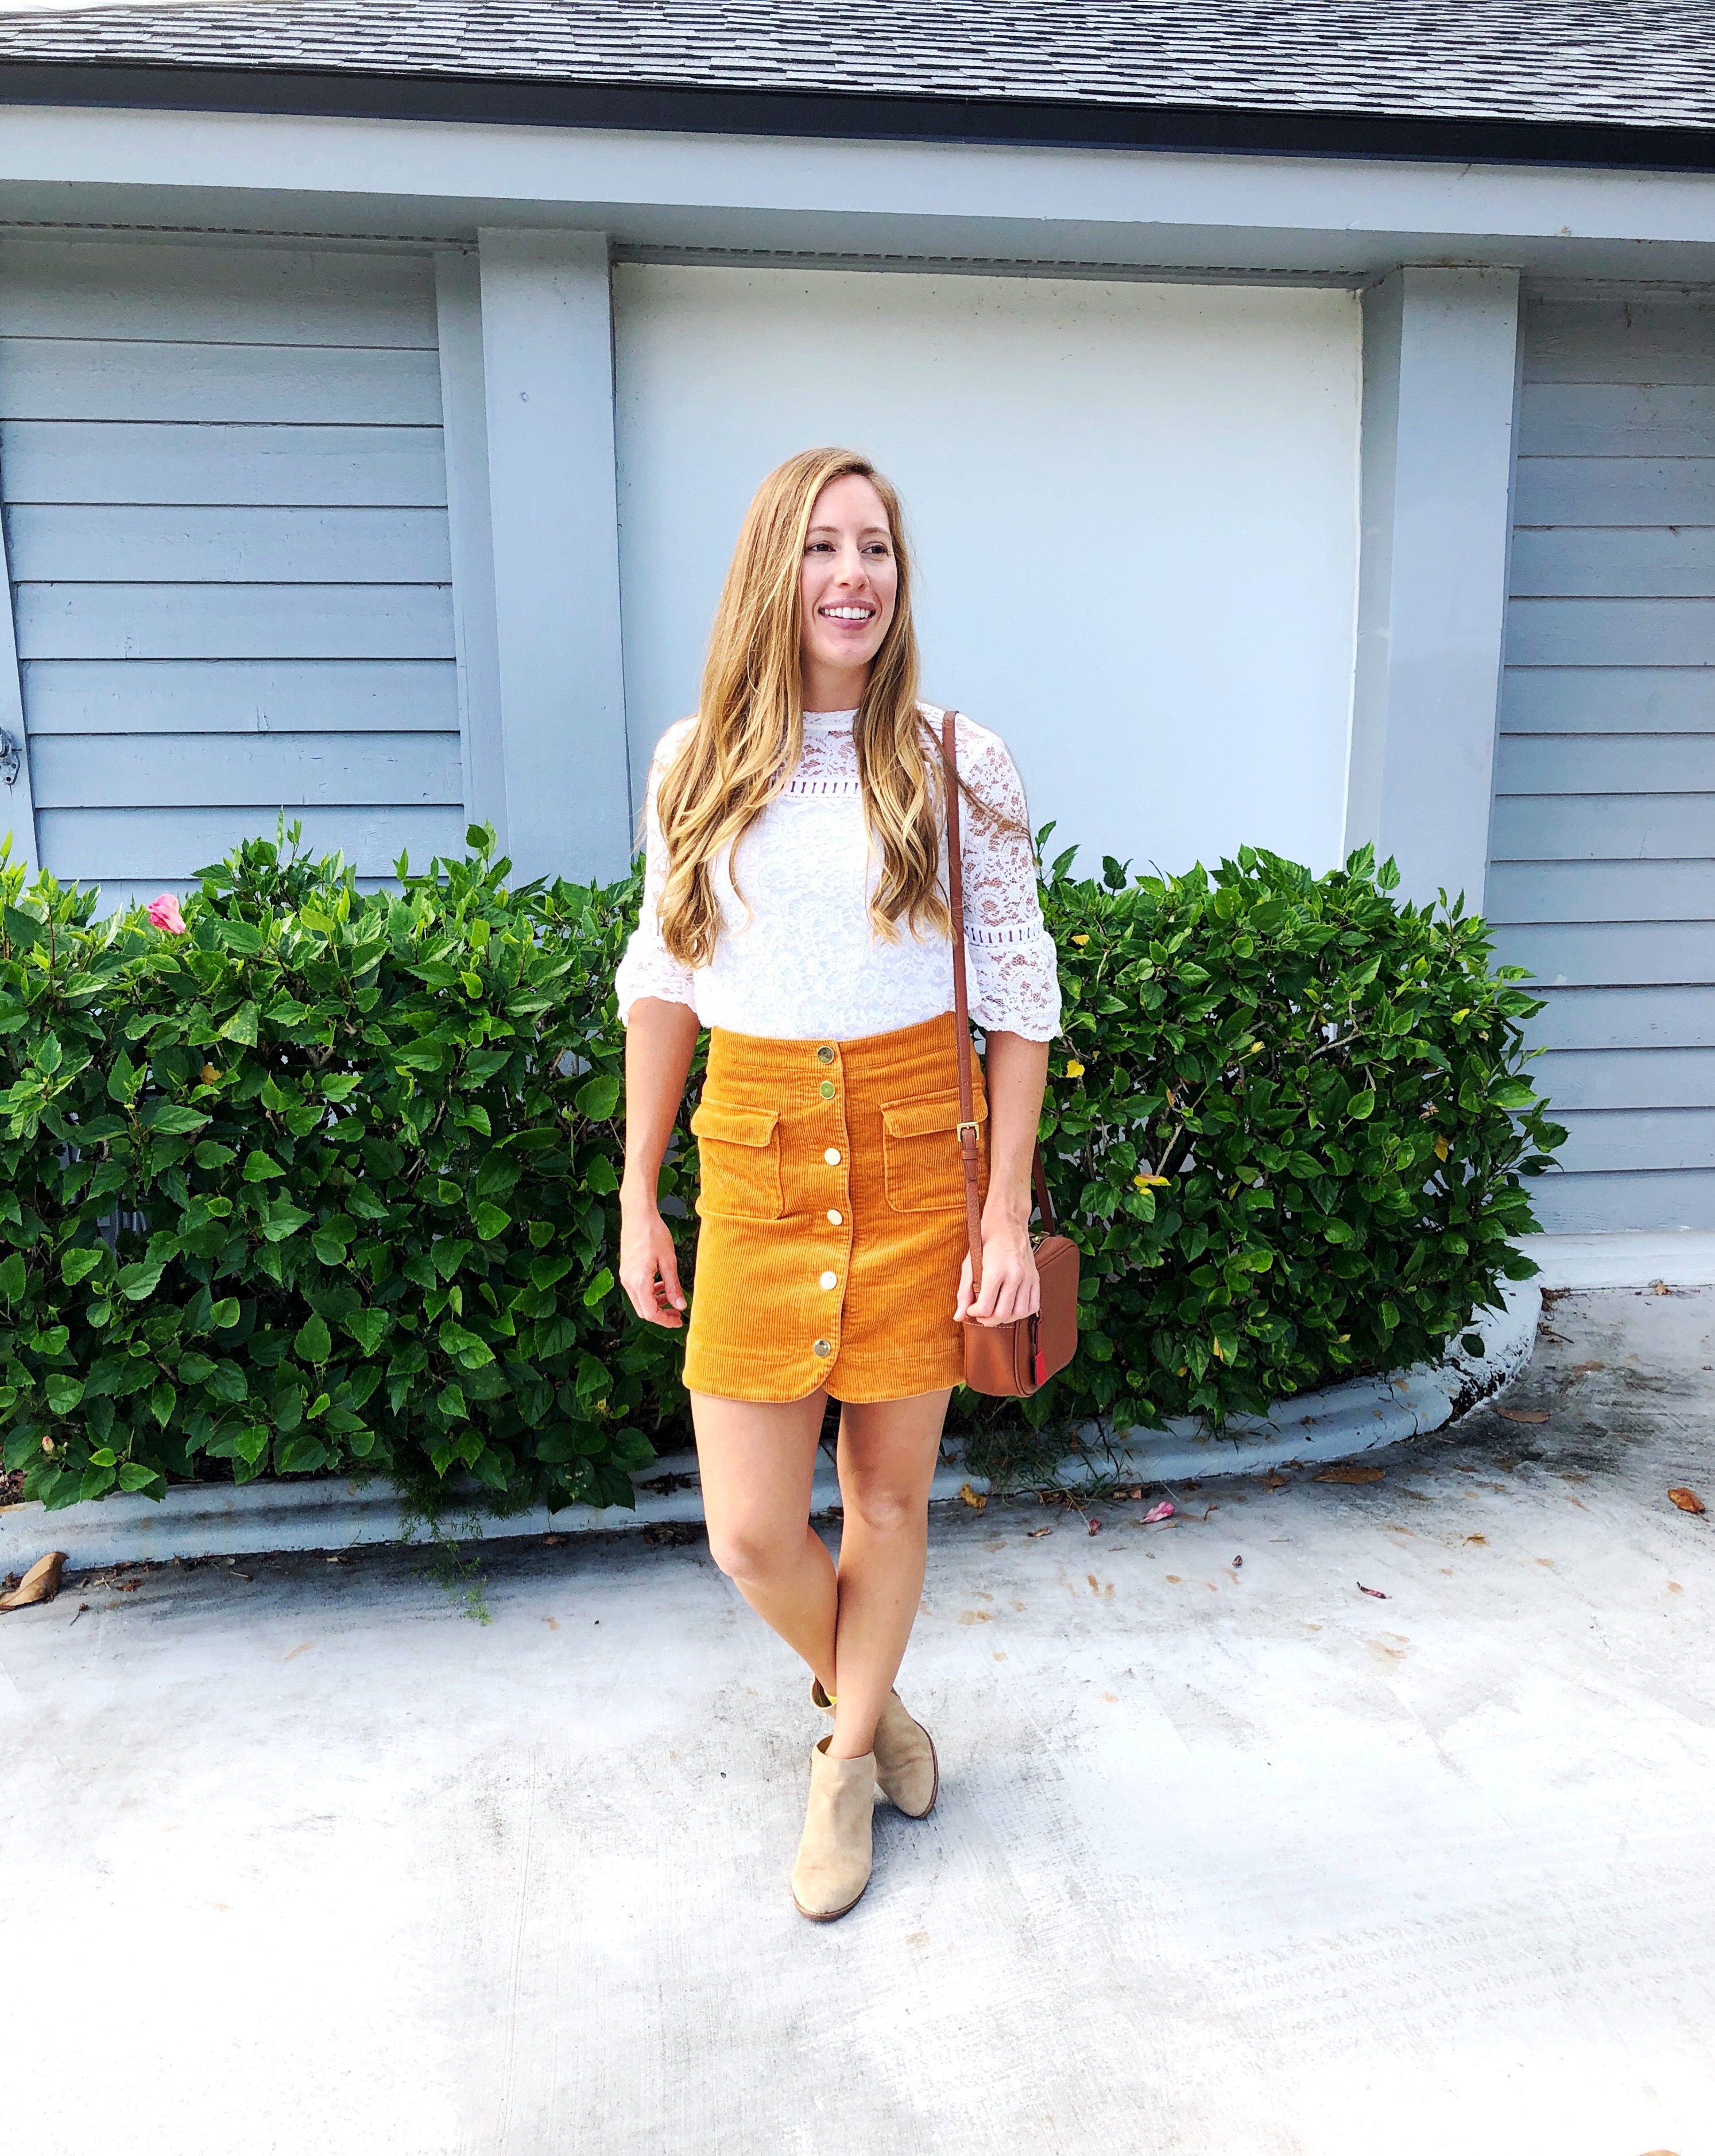 How to Style a Lace Top for Fall | How to Wear a Lace Top for Fall | Suede Skirt | Corduroy Skirt | How to Dress for Fall in Warm Weather |Fall Outfit Idea - Sunshine Style